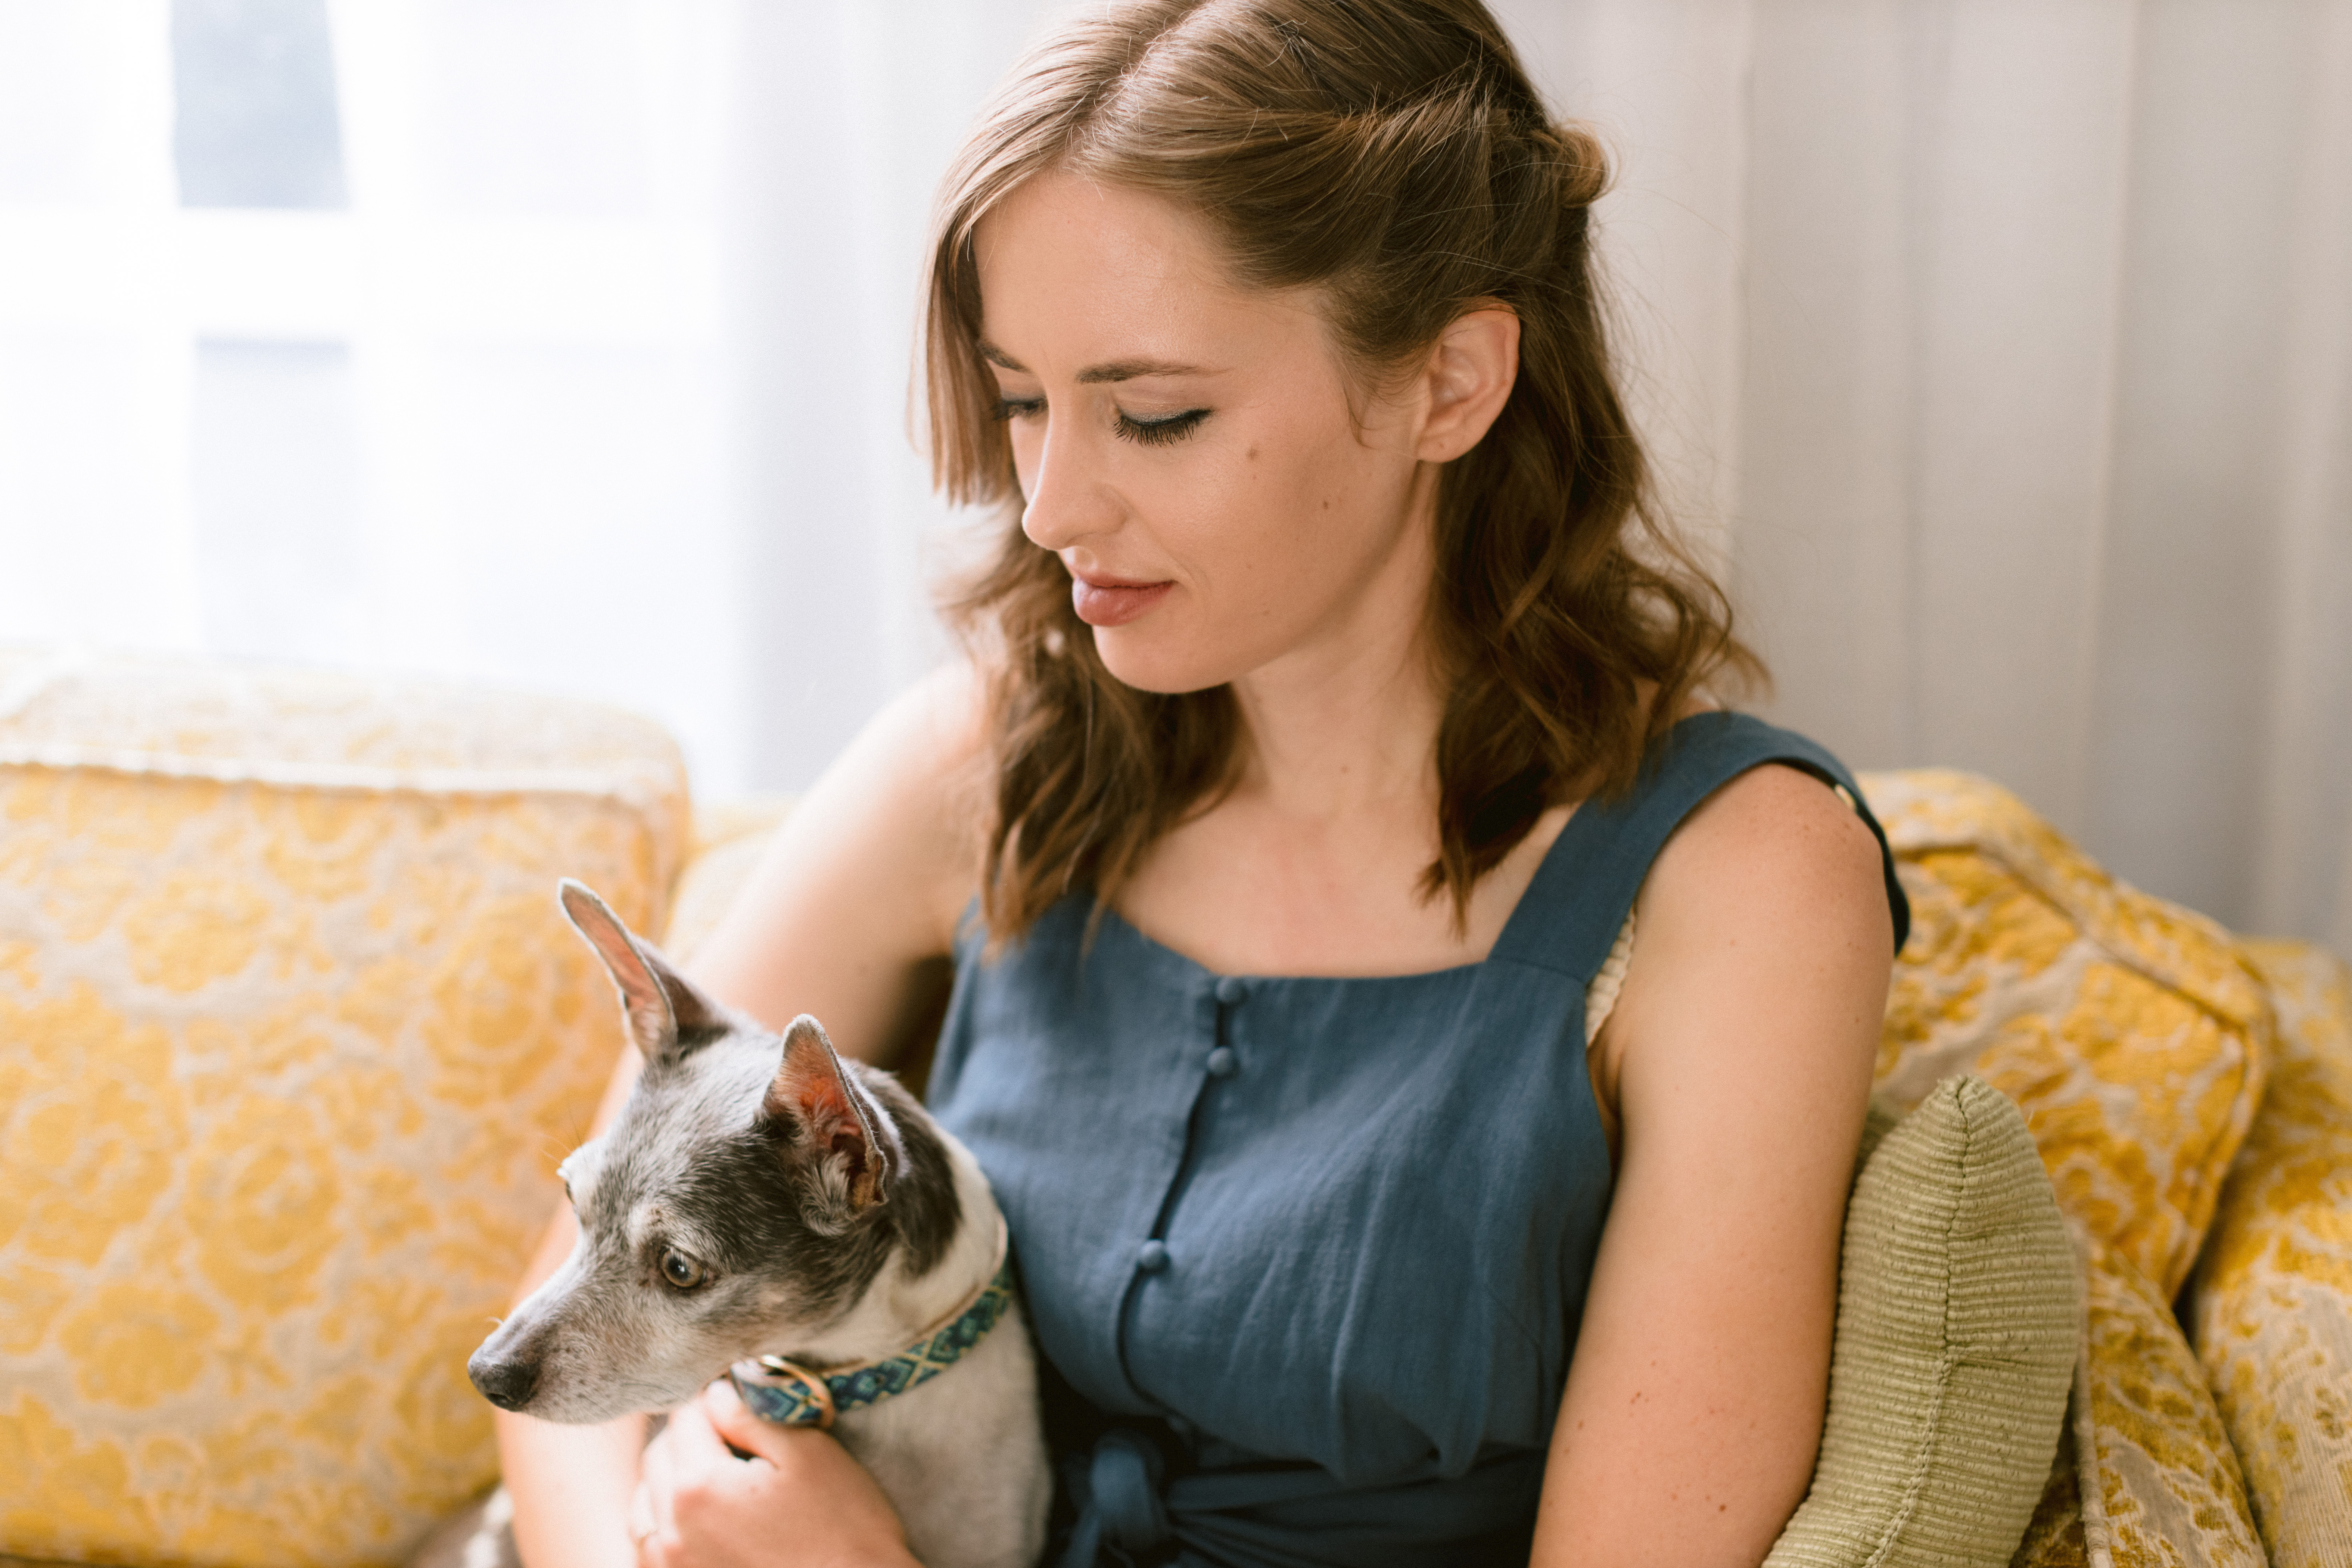 Carrie Grinstead looks down while she sits on a yellow couch, a small dog in her arms.